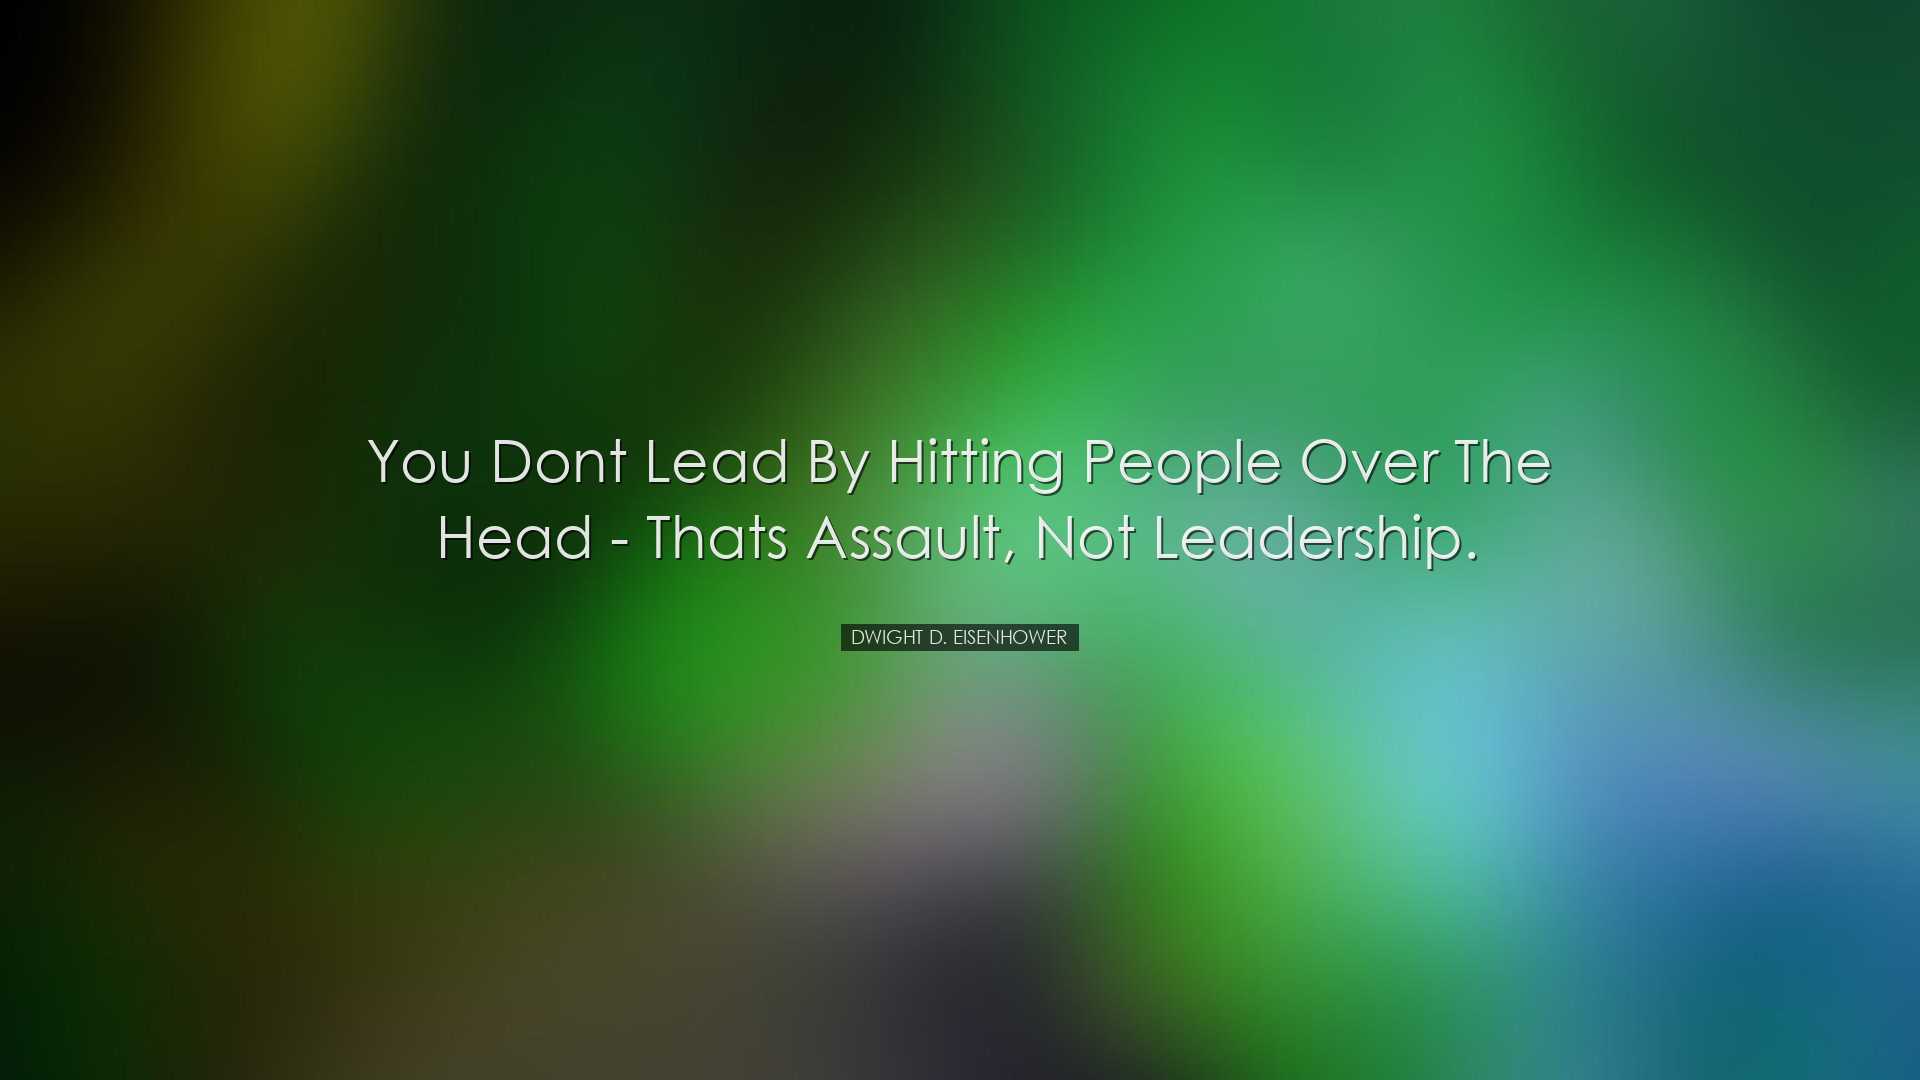 You dont lead by hitting people over the head - thats assault, not